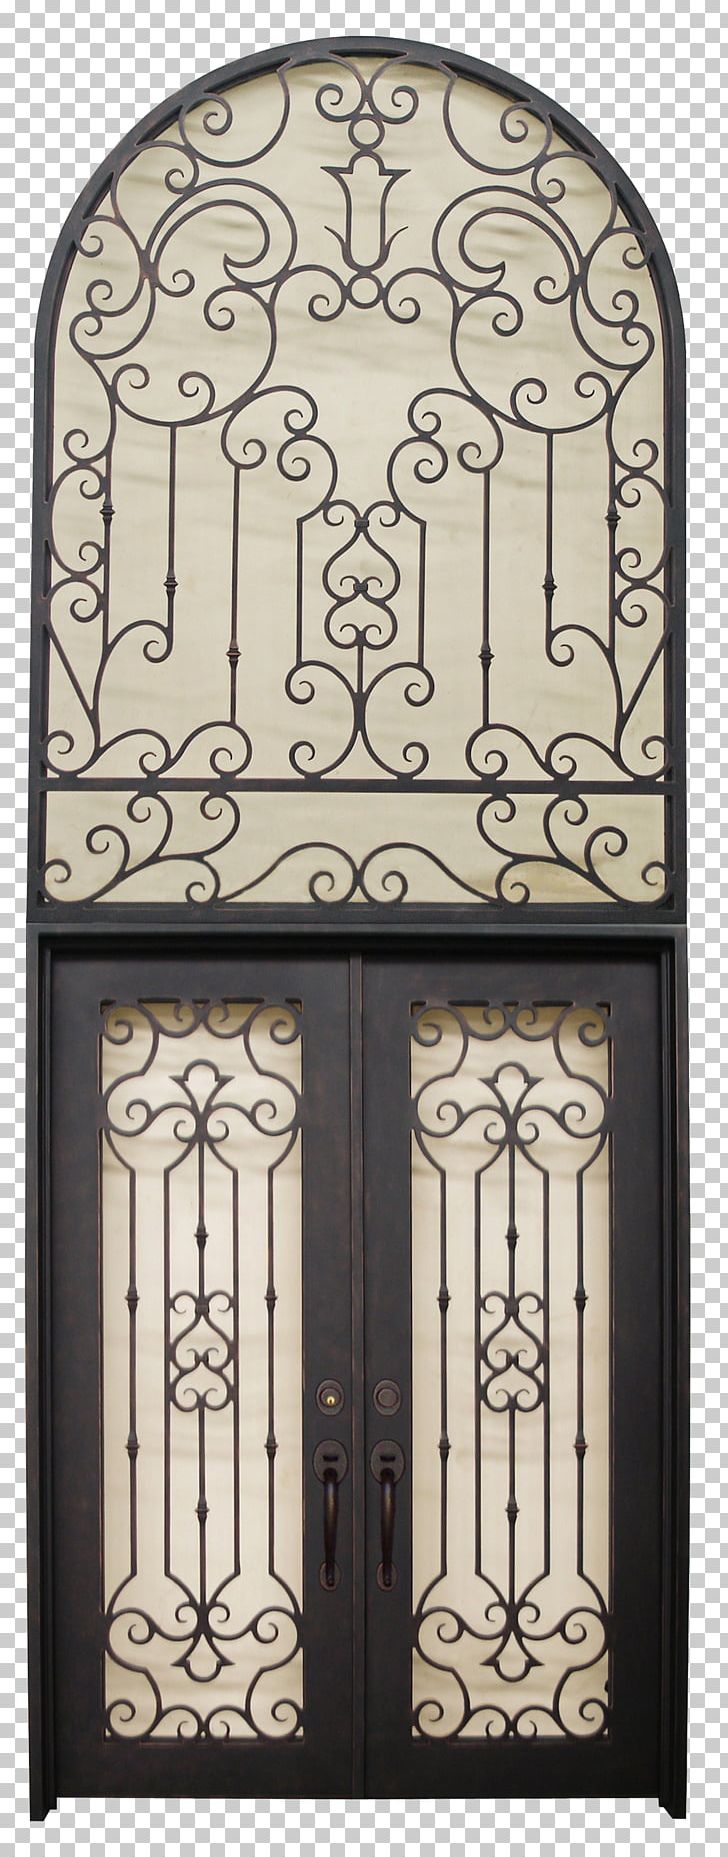 Window Door Arch Iron Sidelight PNG, Clipart, Arch, Architecture, Com, Company, Door Free PNG Download